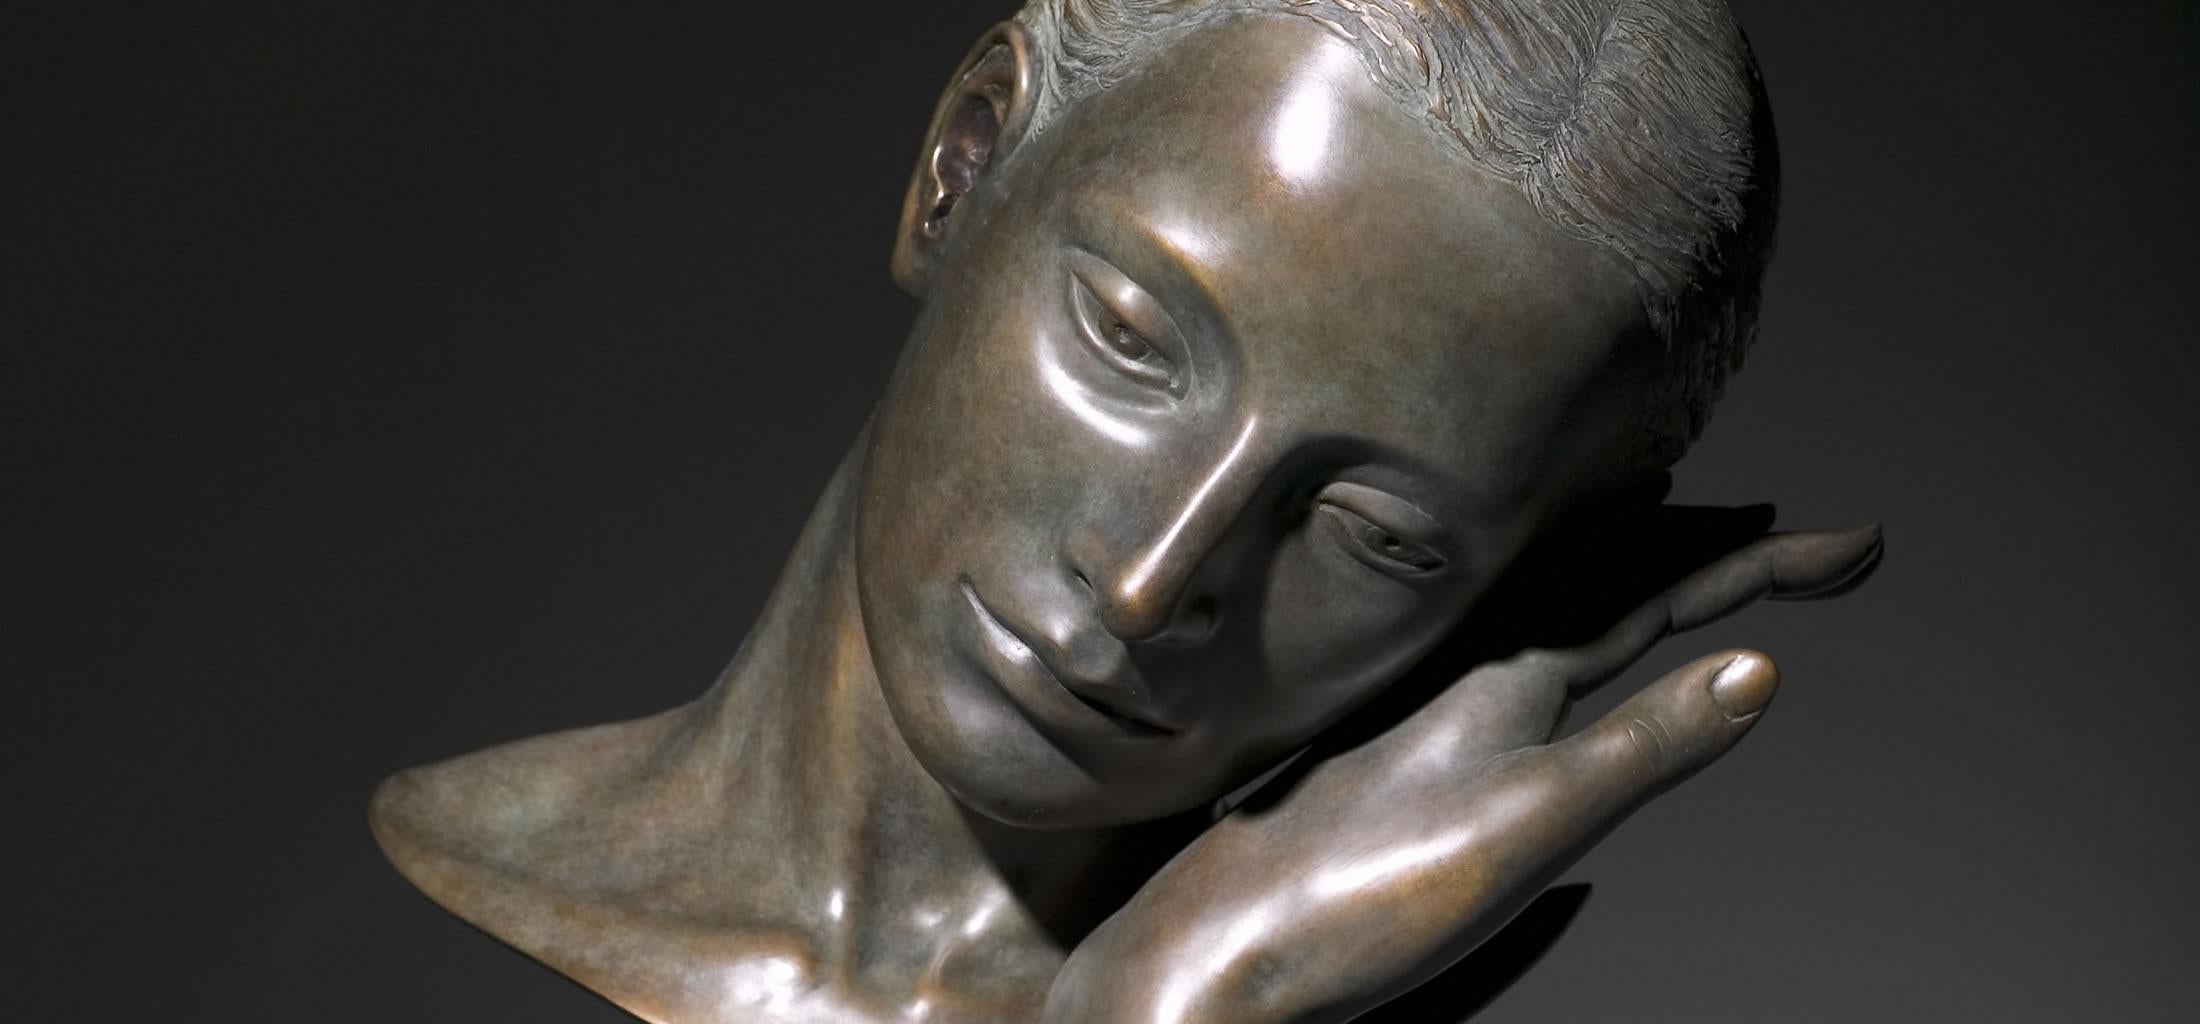 Et Tu Dors And You Are Sleeping Bronze Sculpture Portrait Classic Contemporary

The sculptures of Margot Homan (1956, Oss, the Netherlands) show a perfect command of the old craft of modelling and sculpting, with which she continually develops an